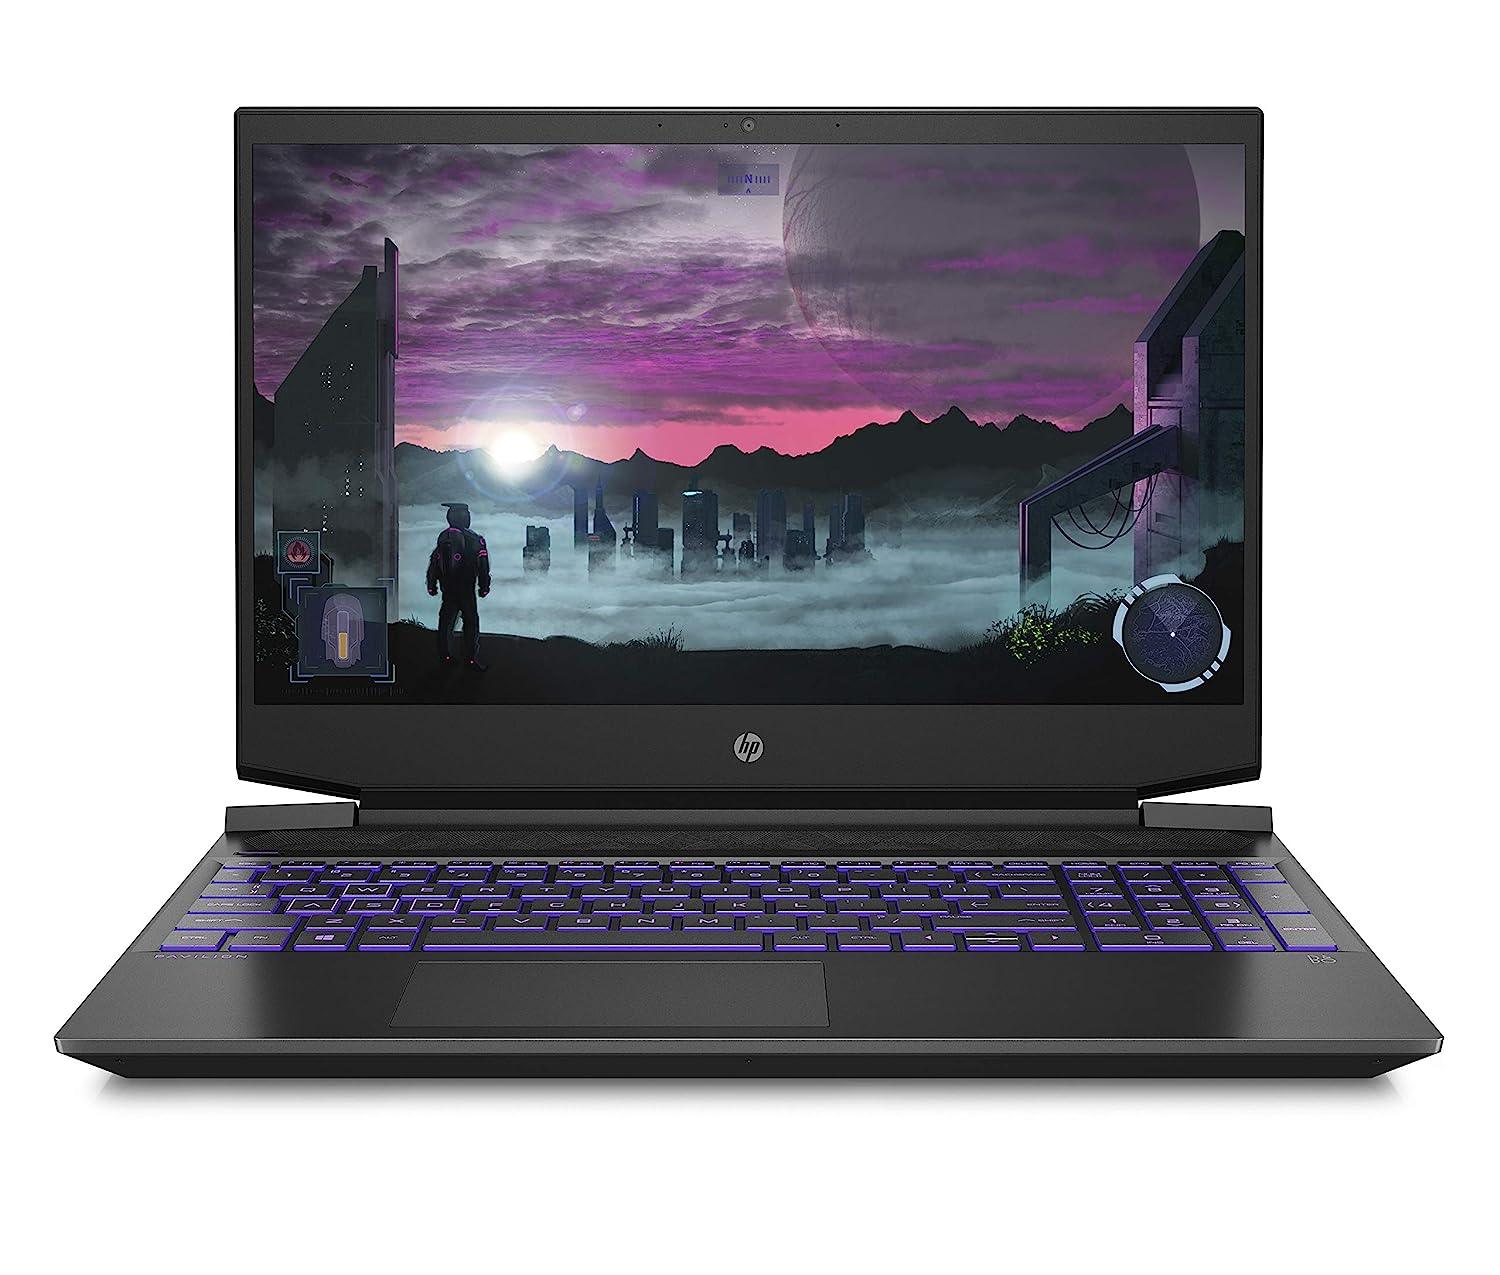 Top 10 HP Pavilion Gaming Laptops for Gamers: Buyer's Guide